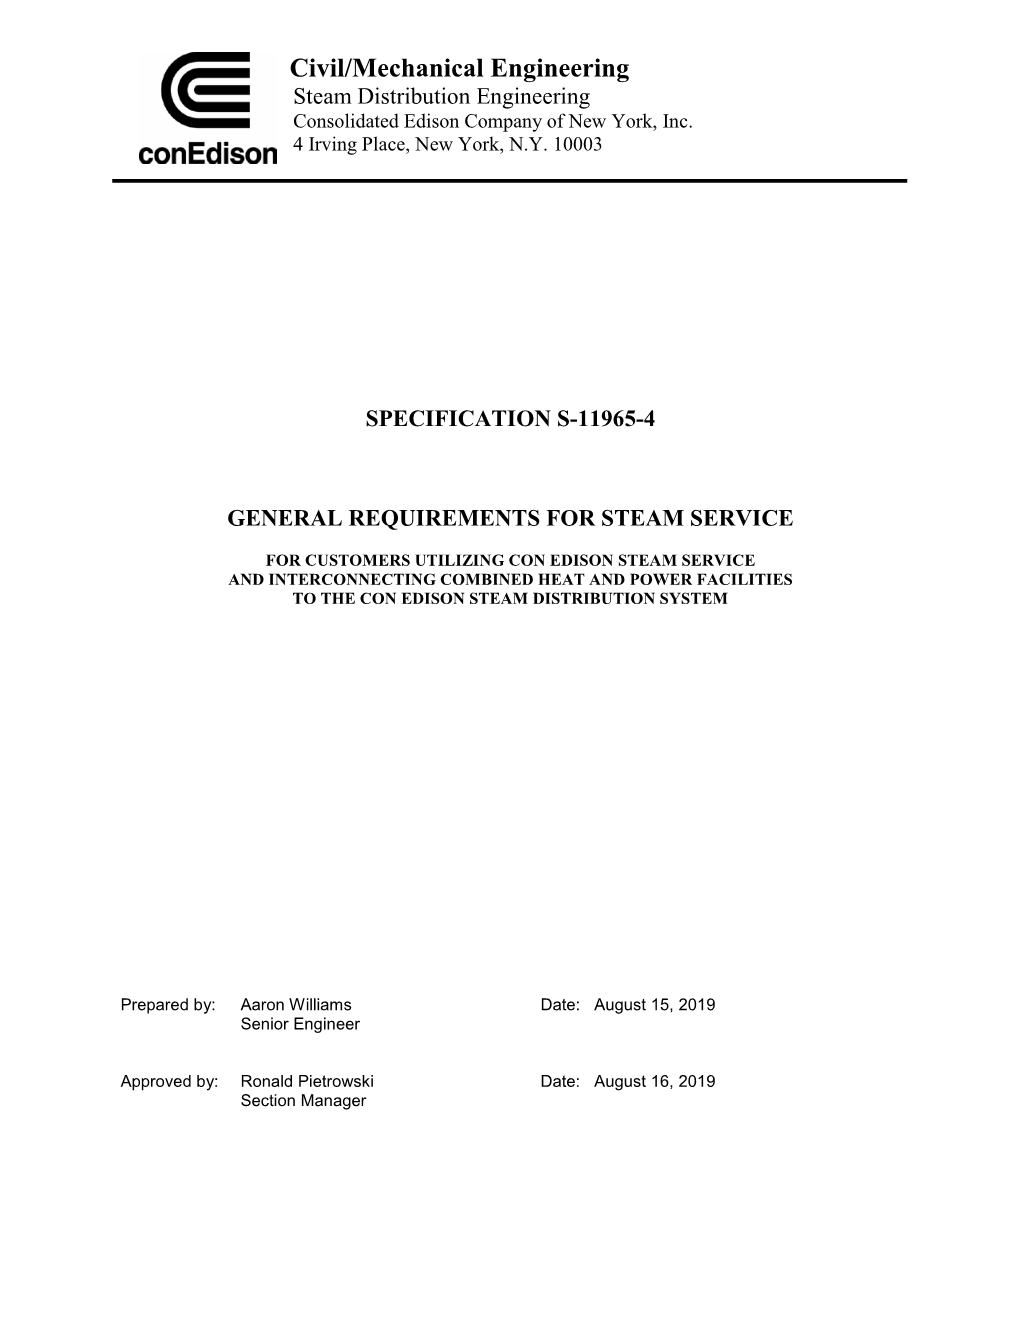 General Requirements for Steam Service (S-11965)